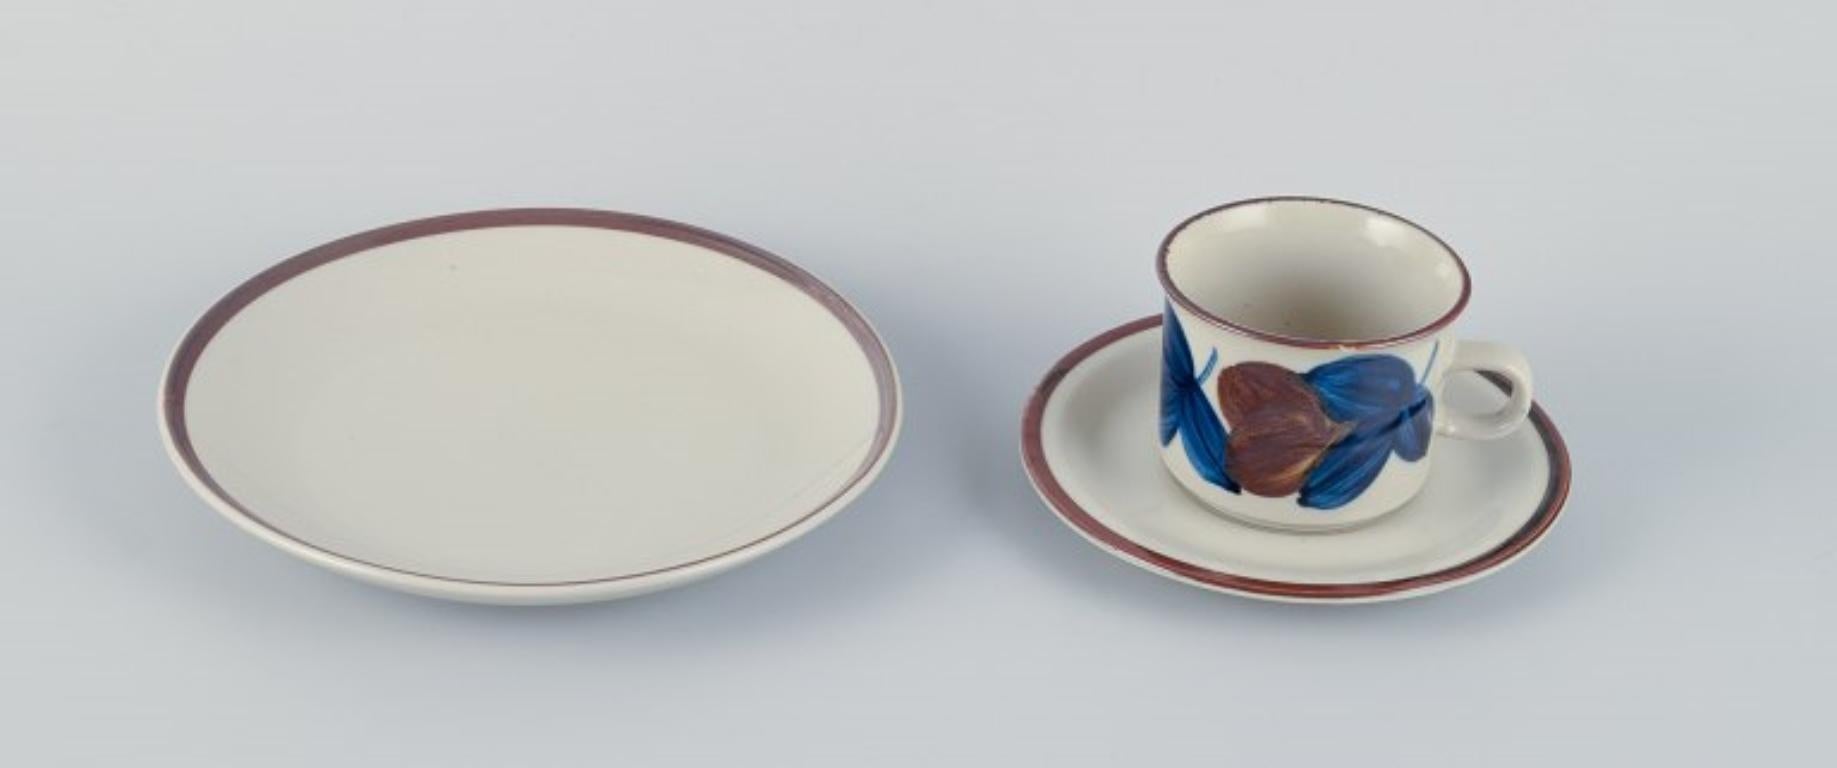 Arabia, Finland, six-person retro coffee set in stoneware.
Hand-painted with floral motifs.
From the 1970s.
In perfect condition.
Not stamped.
Cup: H 6.0 cm x D 7.9 cm (excluding handle).
Plate: D 19.2 cm.